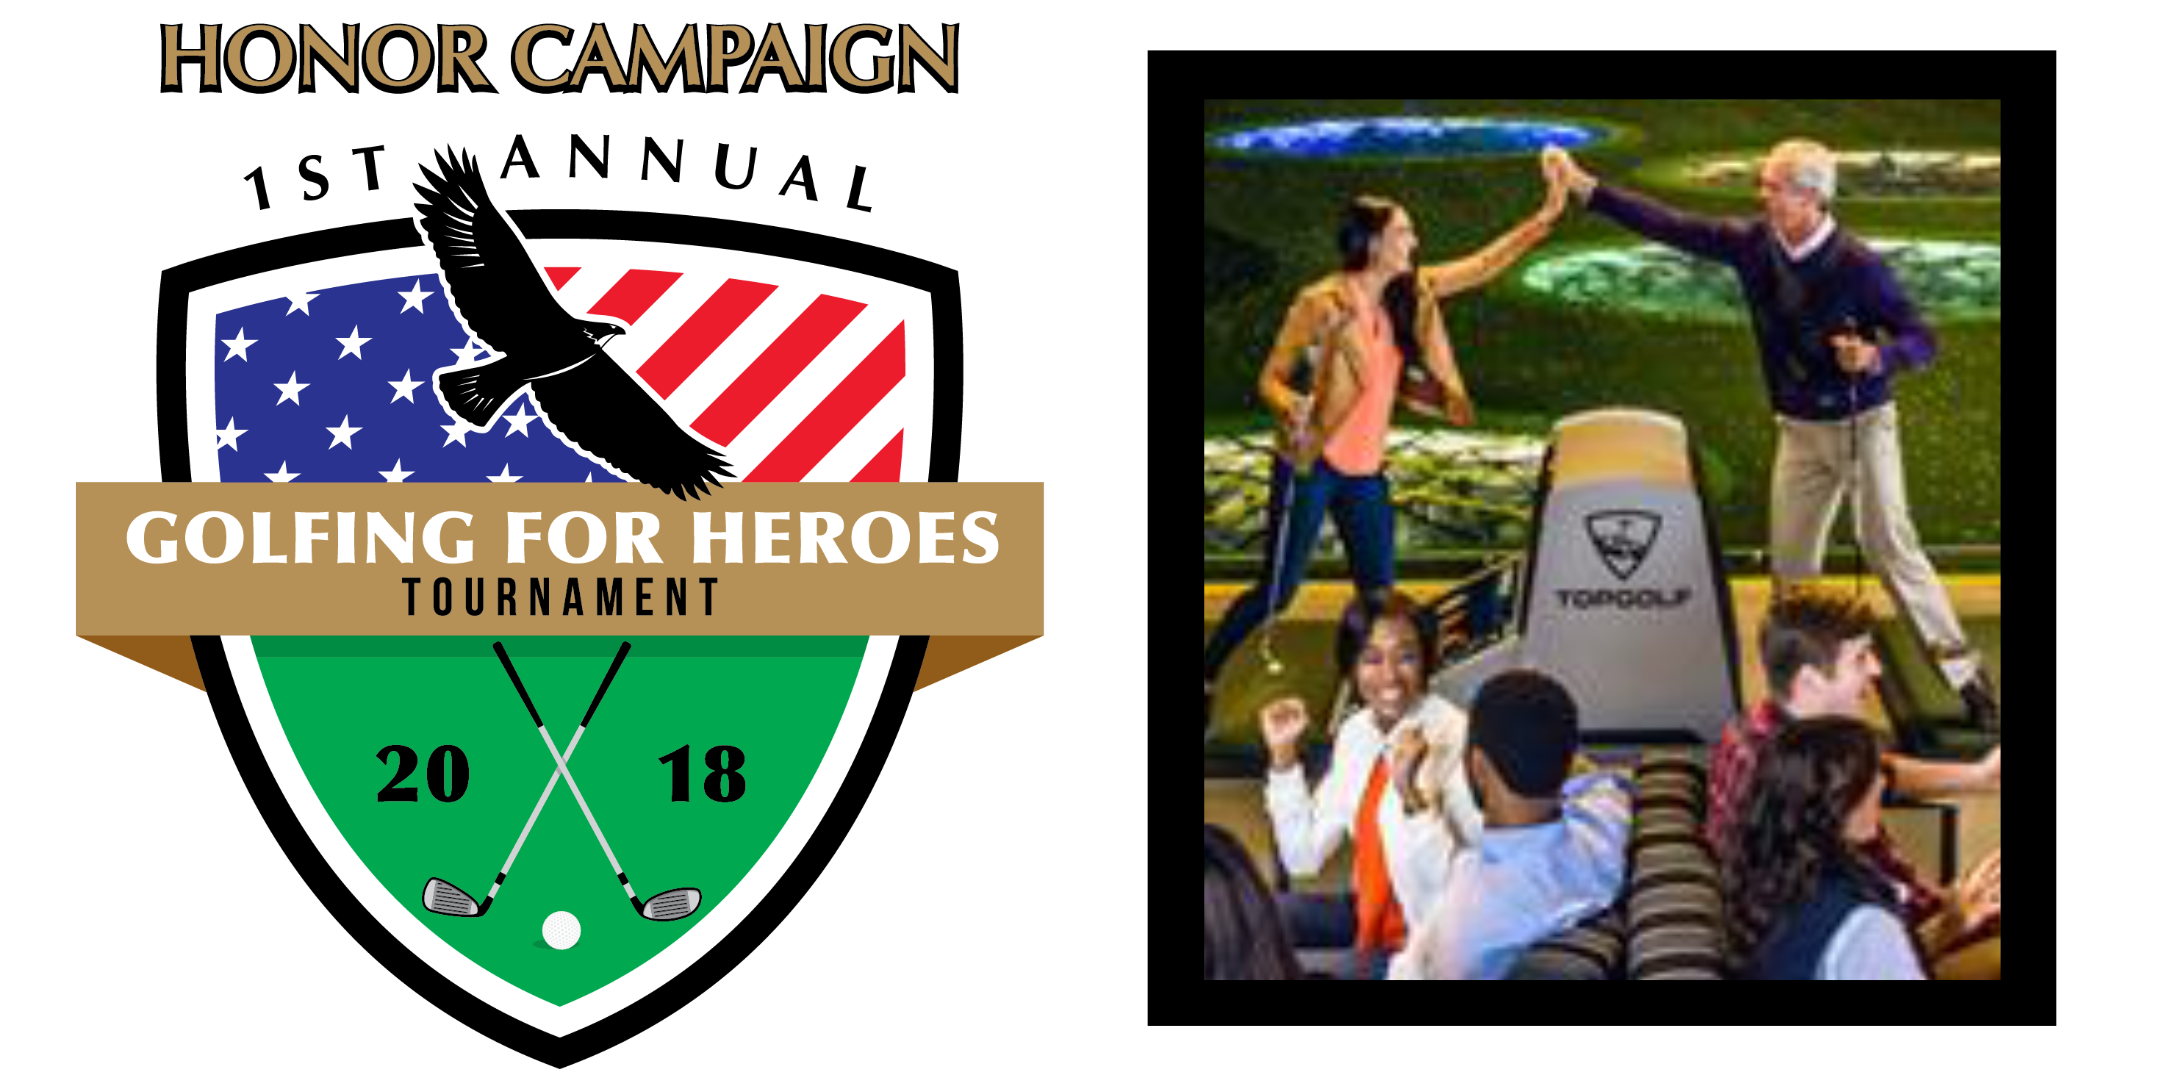 Honor Campaign - 1st Annual Golfing for Heroes Tournament 2018